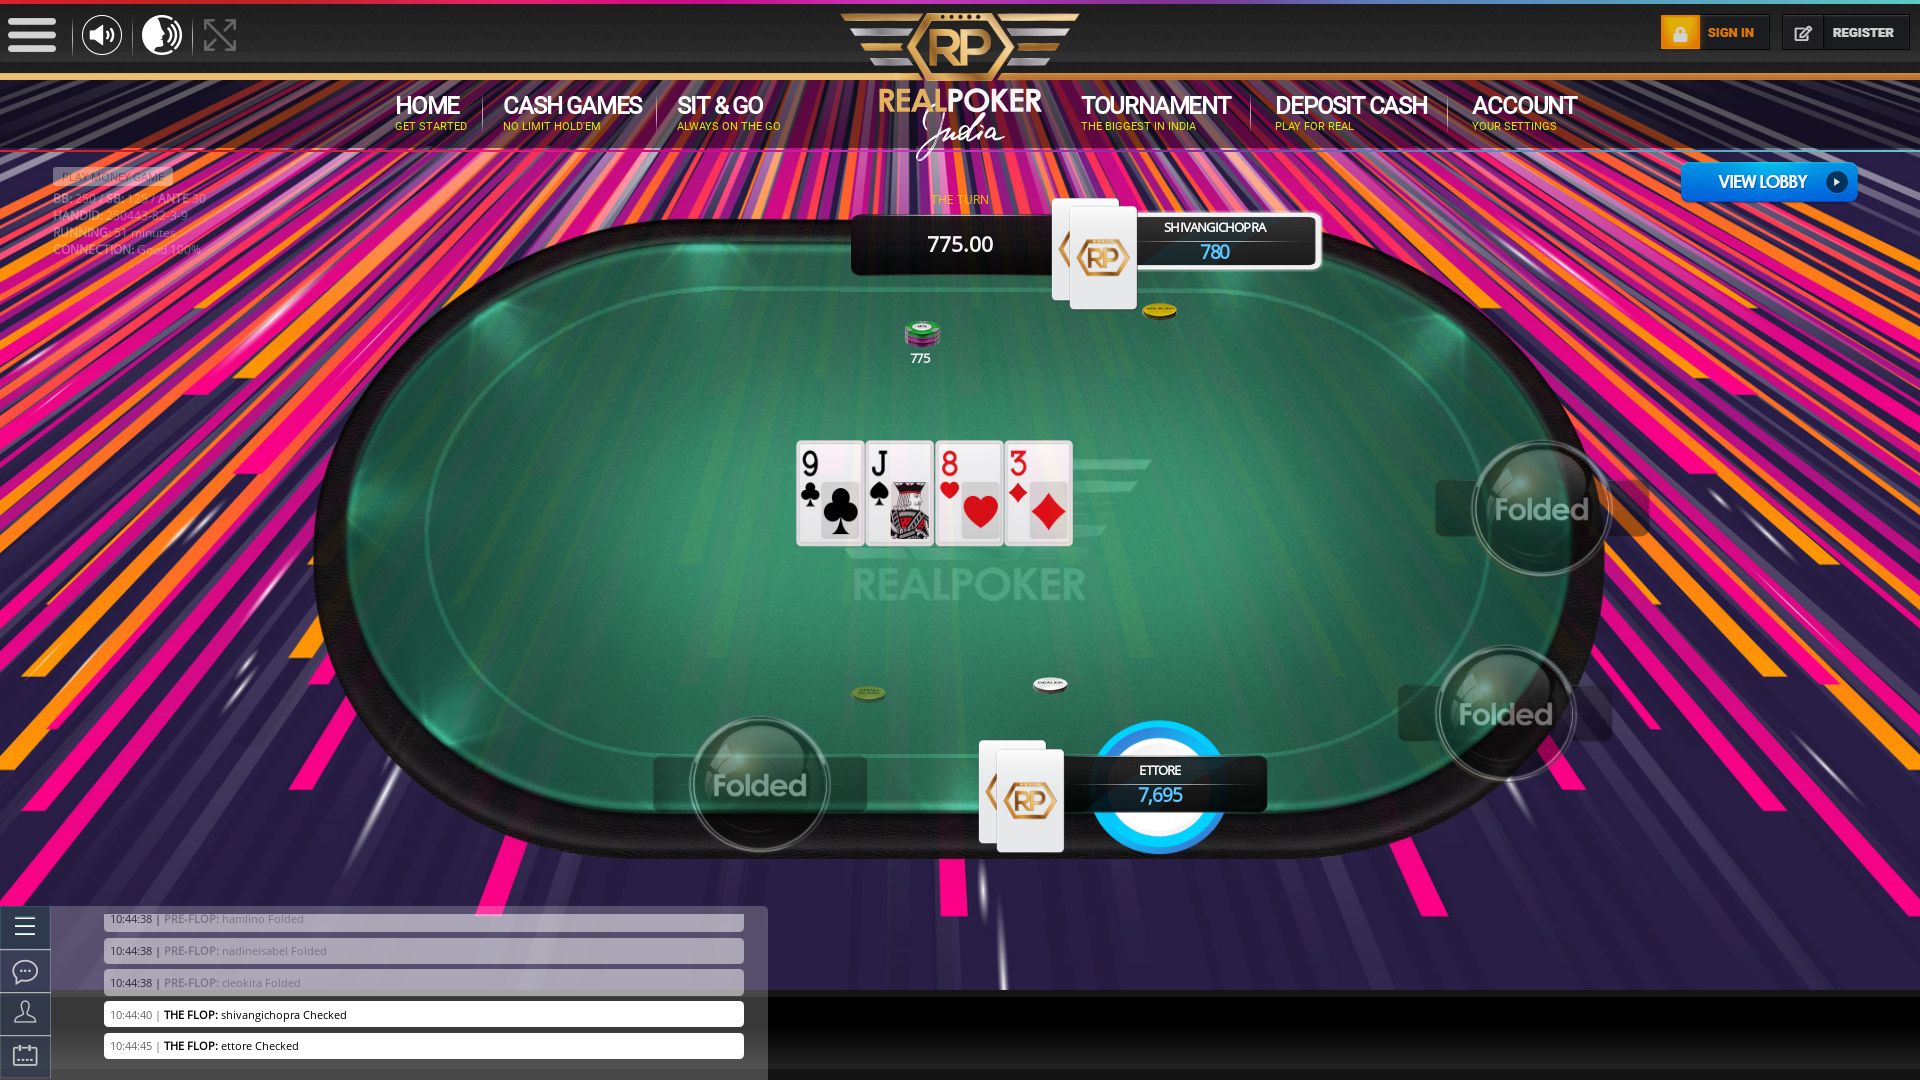 Real poker on a 10 player table in the 5 game